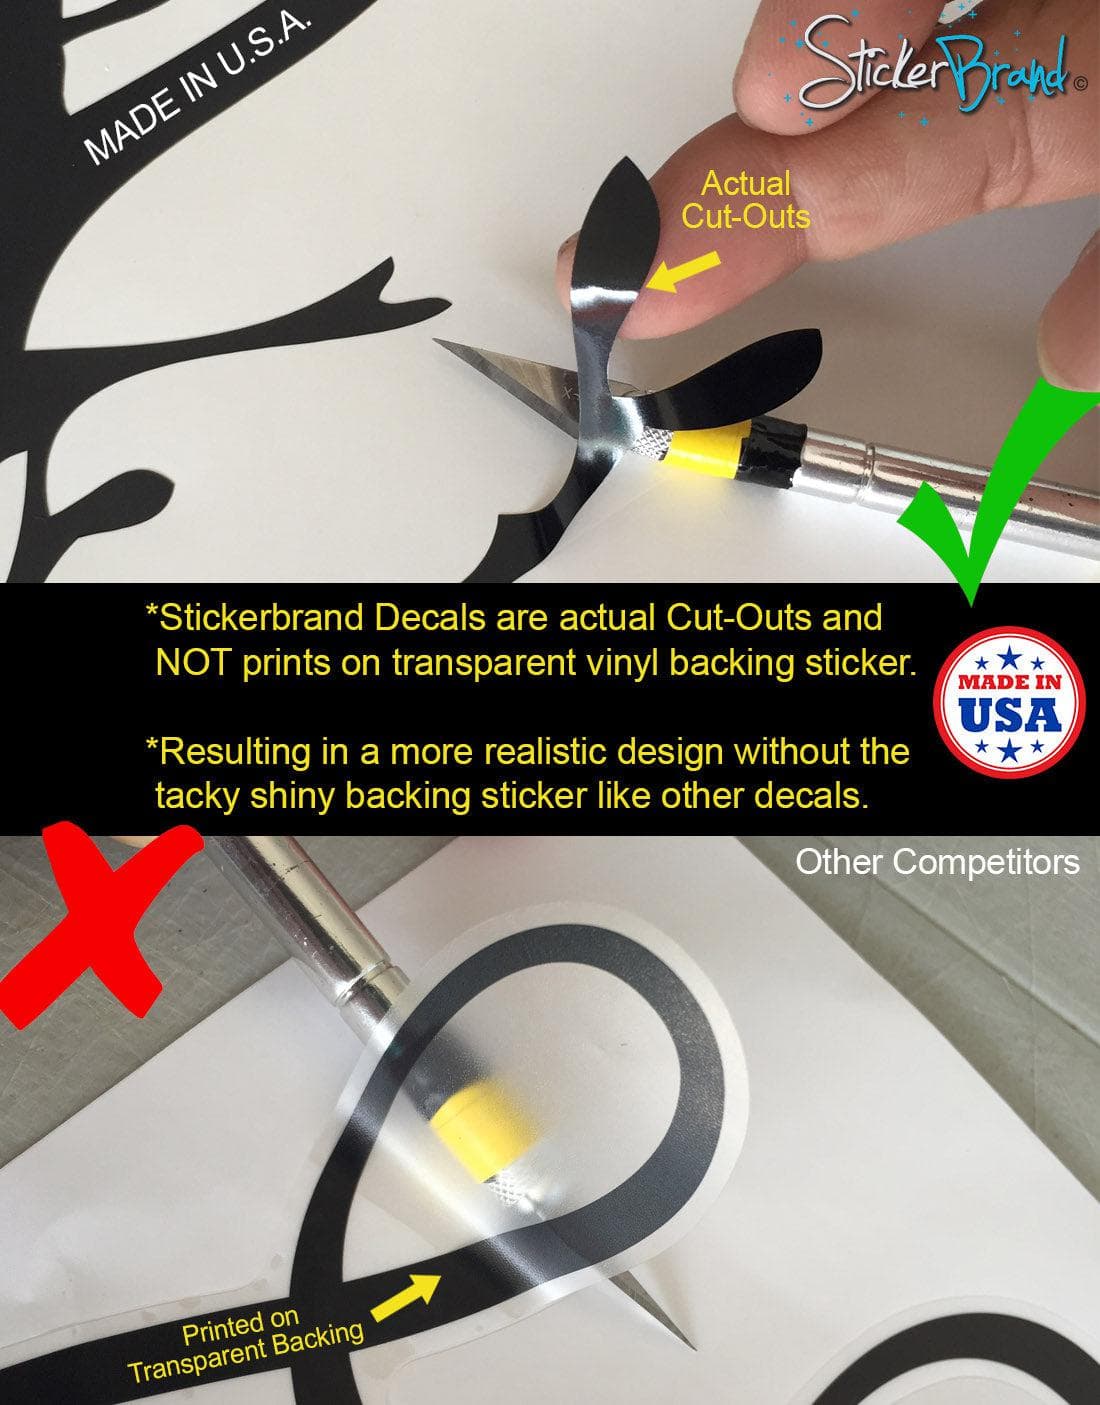 Close up on a vinyl decal being cut. In yellow font is a quote: "StickerBrand Decals are actual Cut-Outs and NOT prints on transparent vinyl backing sticker. Resulting in a more realistic design without the tacky shining backing sticker like other decals."